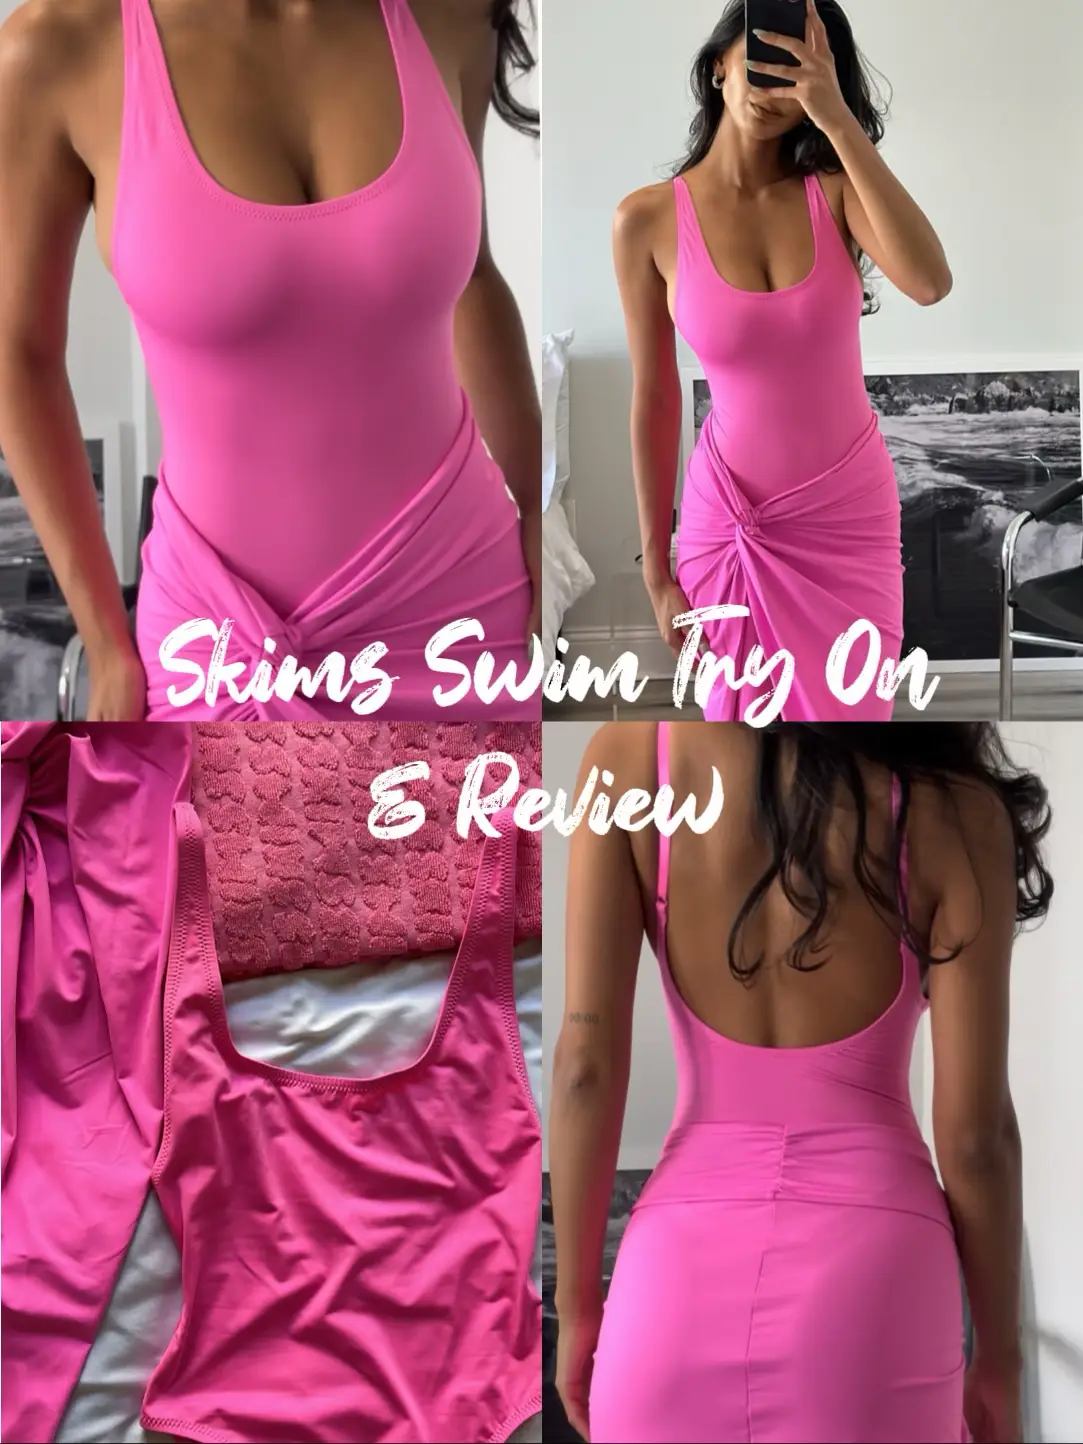 Soft Lounge Tank - Hot Pink - L is in stock at Skims for $38.00